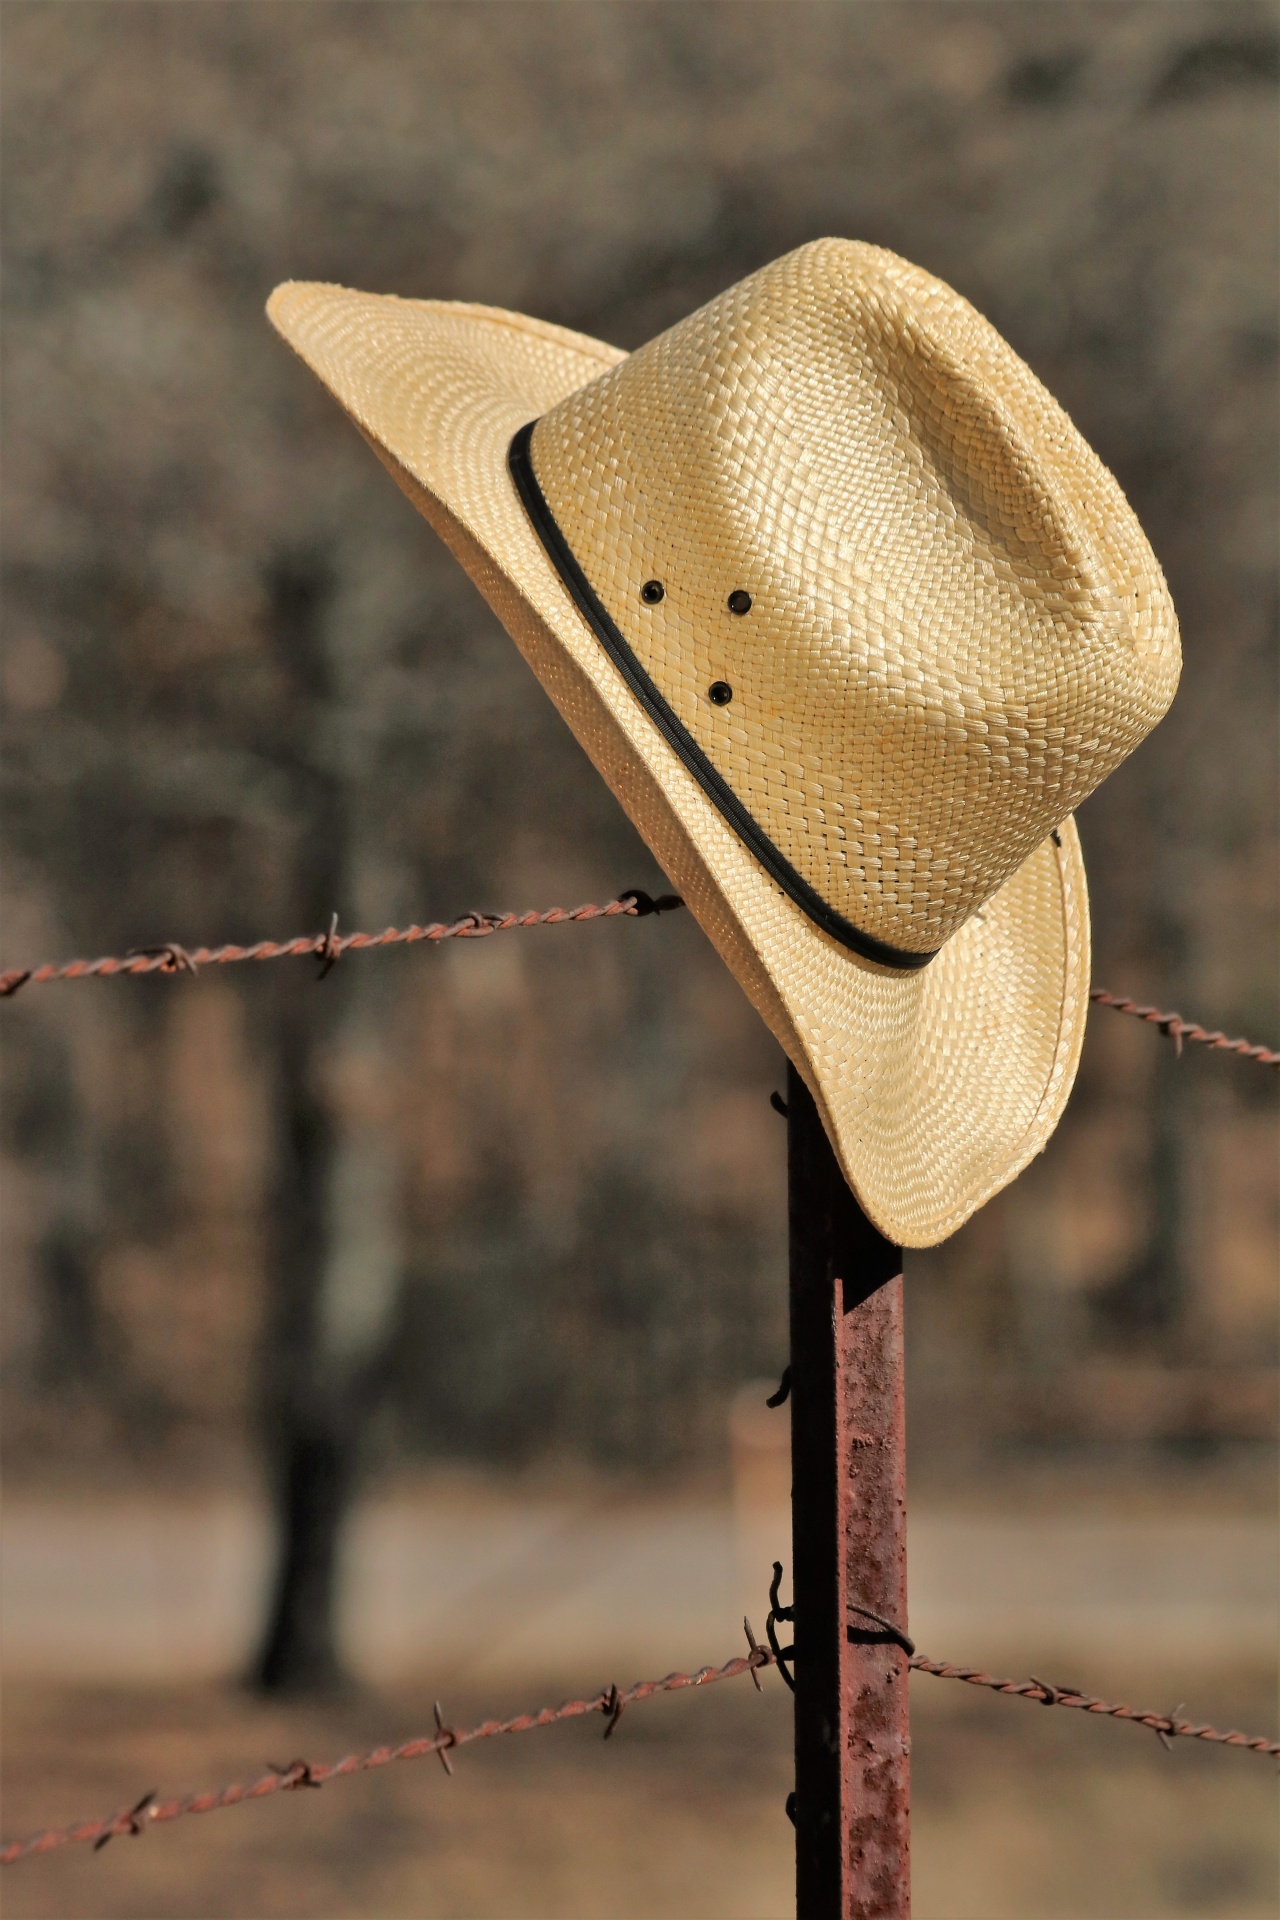 Cowboy Hat On Barbed Wire Fence 2